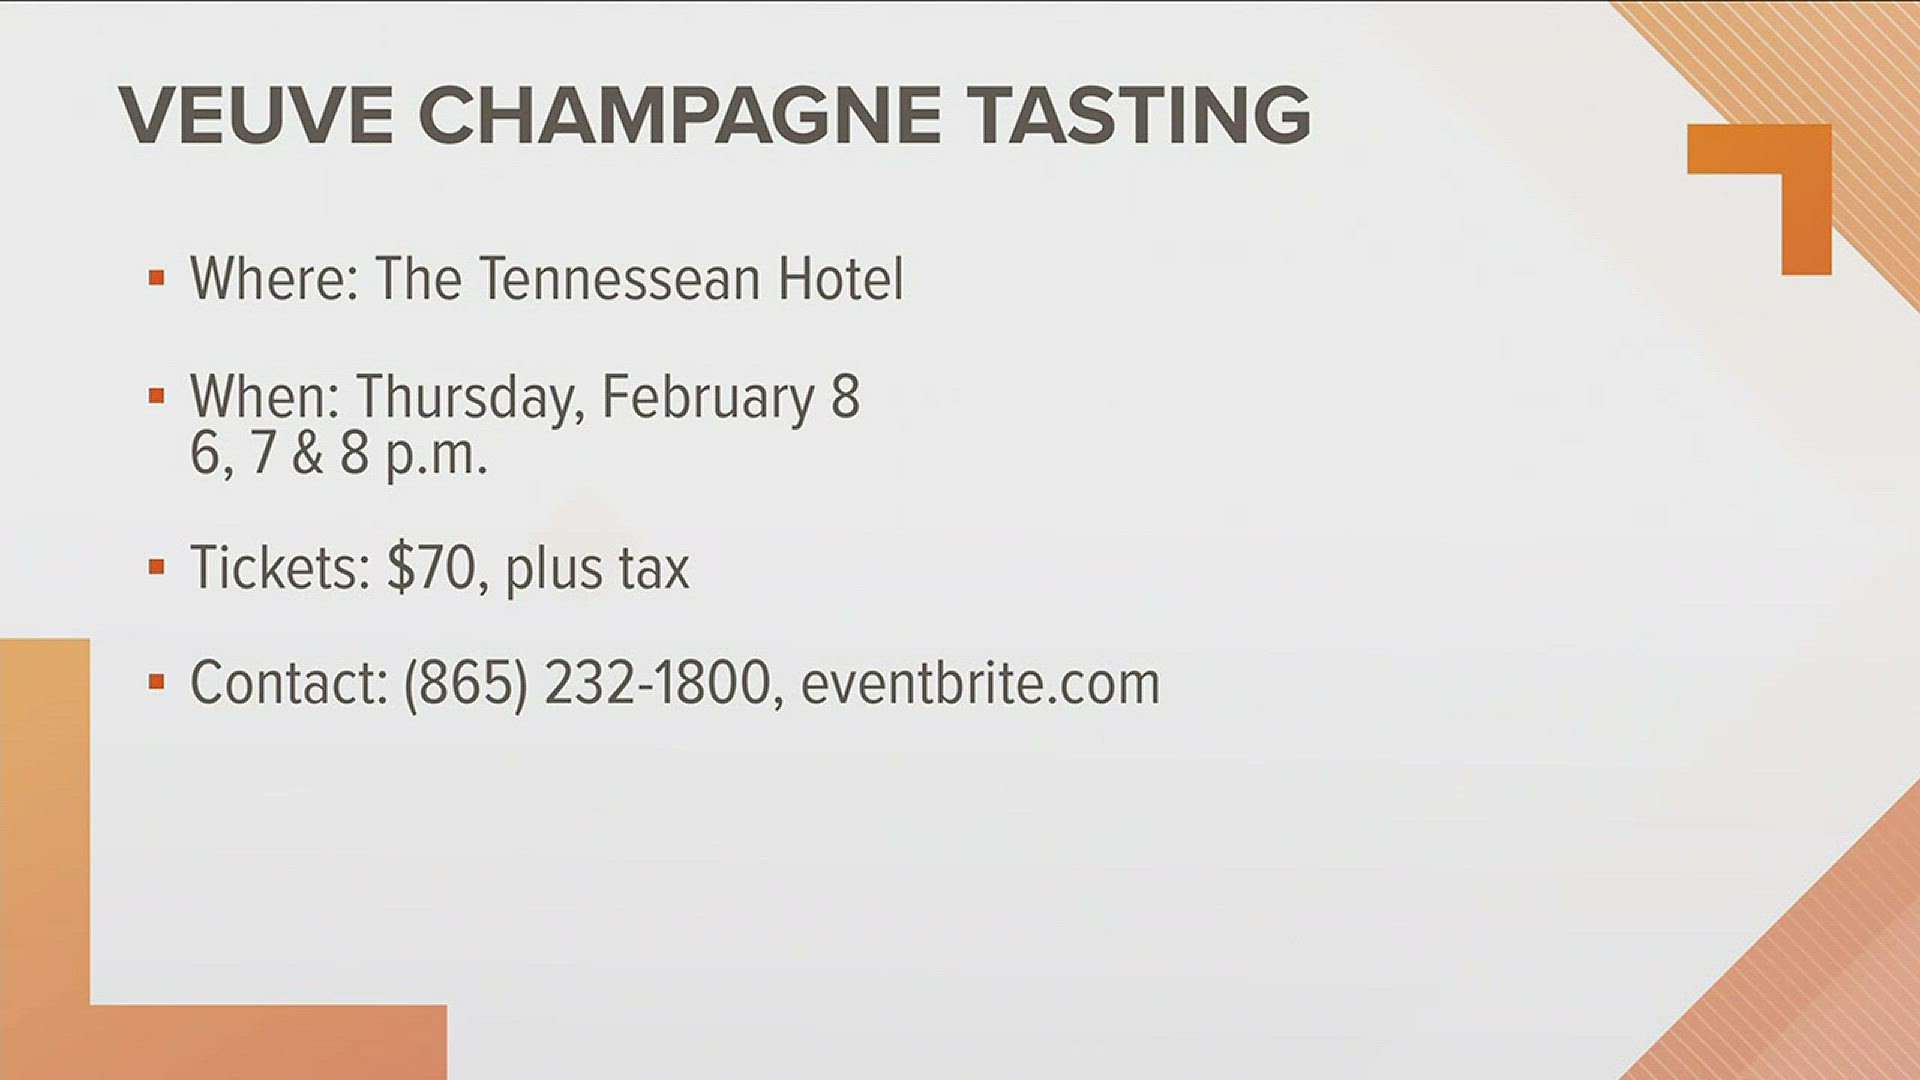 Kyle Hagerty from the Tennessean Hotel has you covered for Valentine's Day events in the Knoxville area.